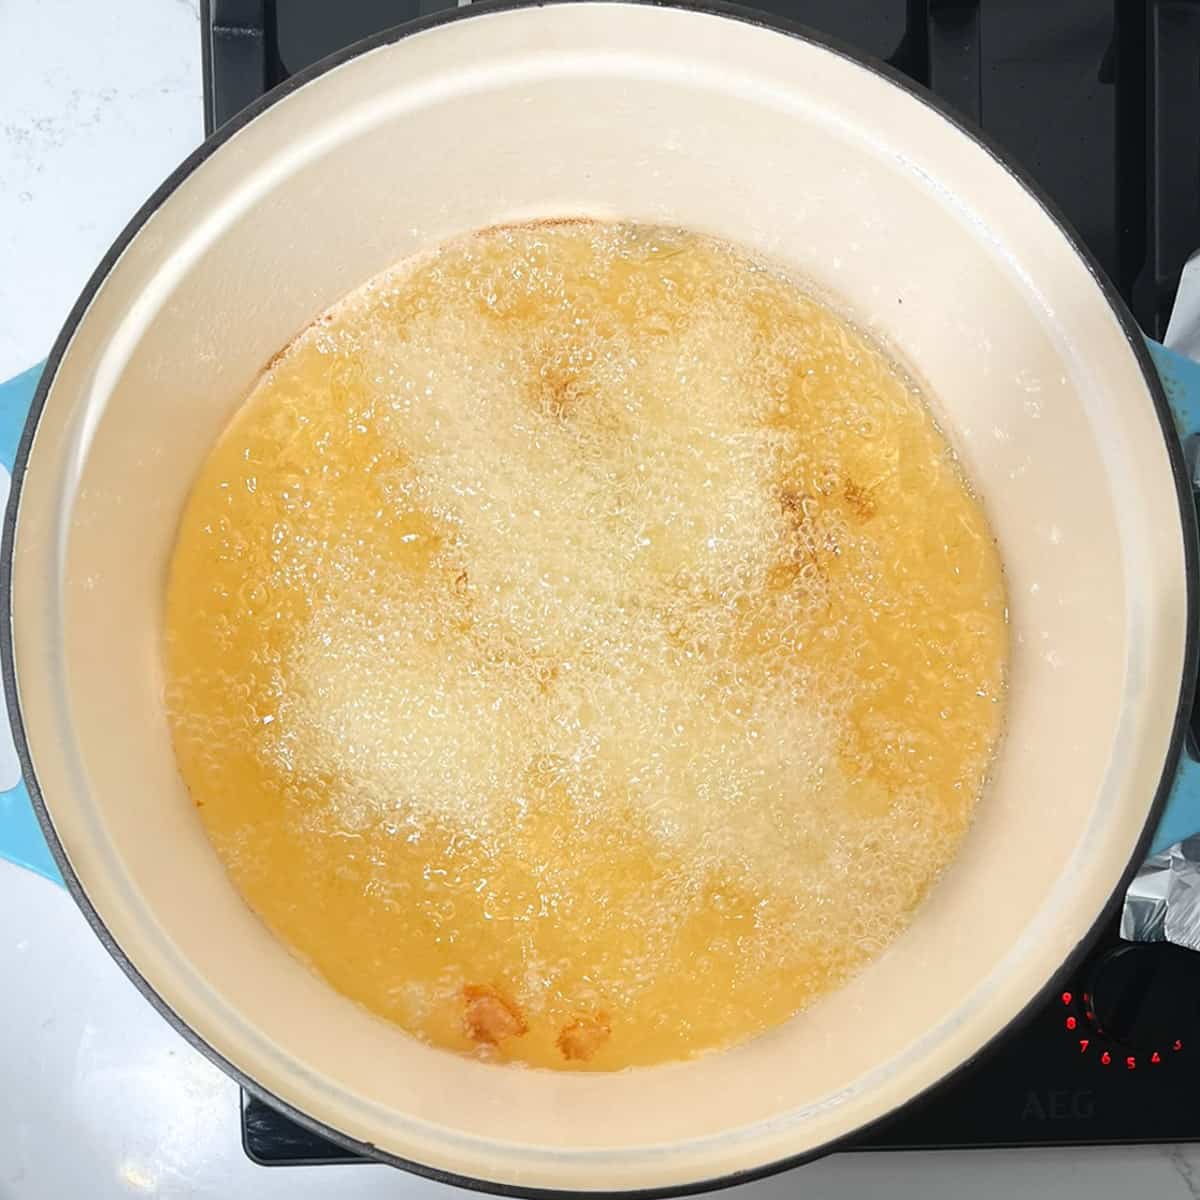 Frying the fish goujons in oil in a large pot.